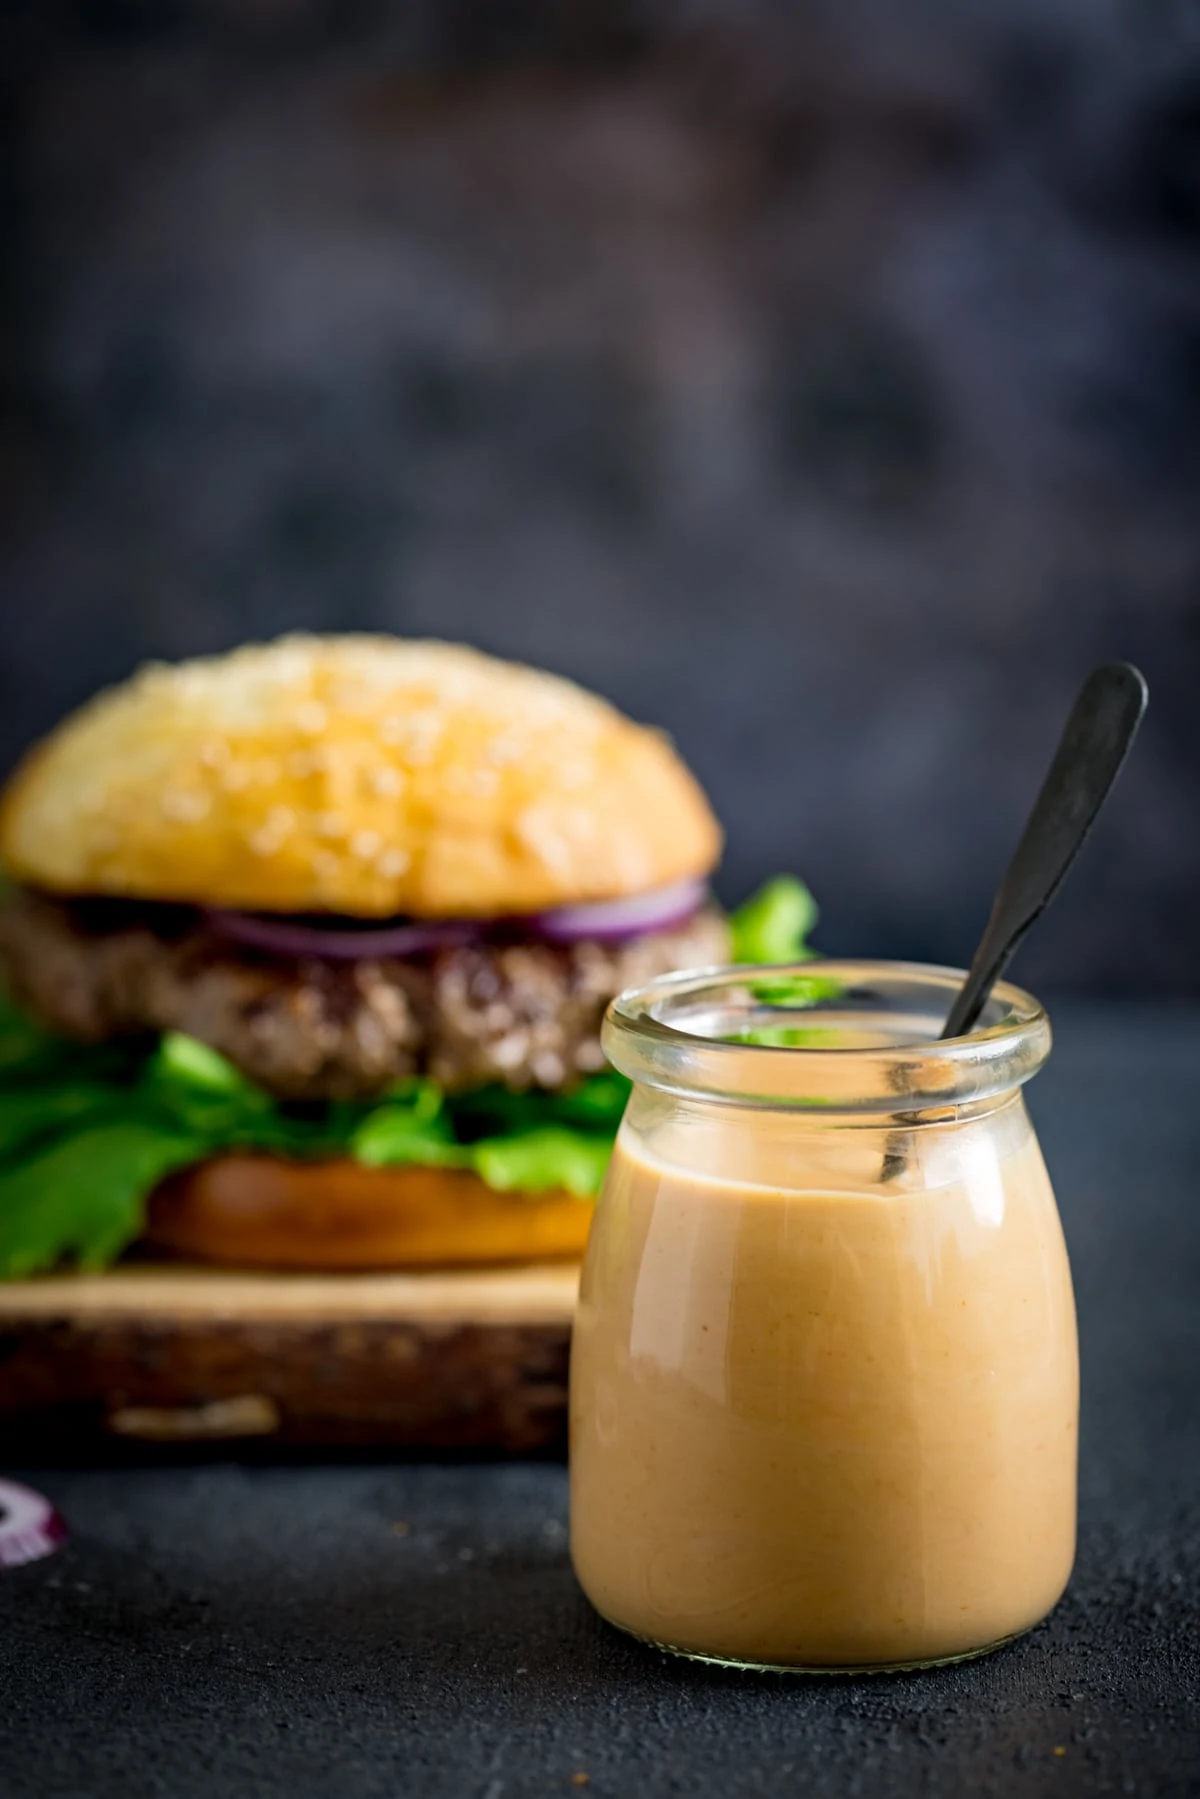 Burger sauce in a glass jar against a dark background. There is a burger in the background.